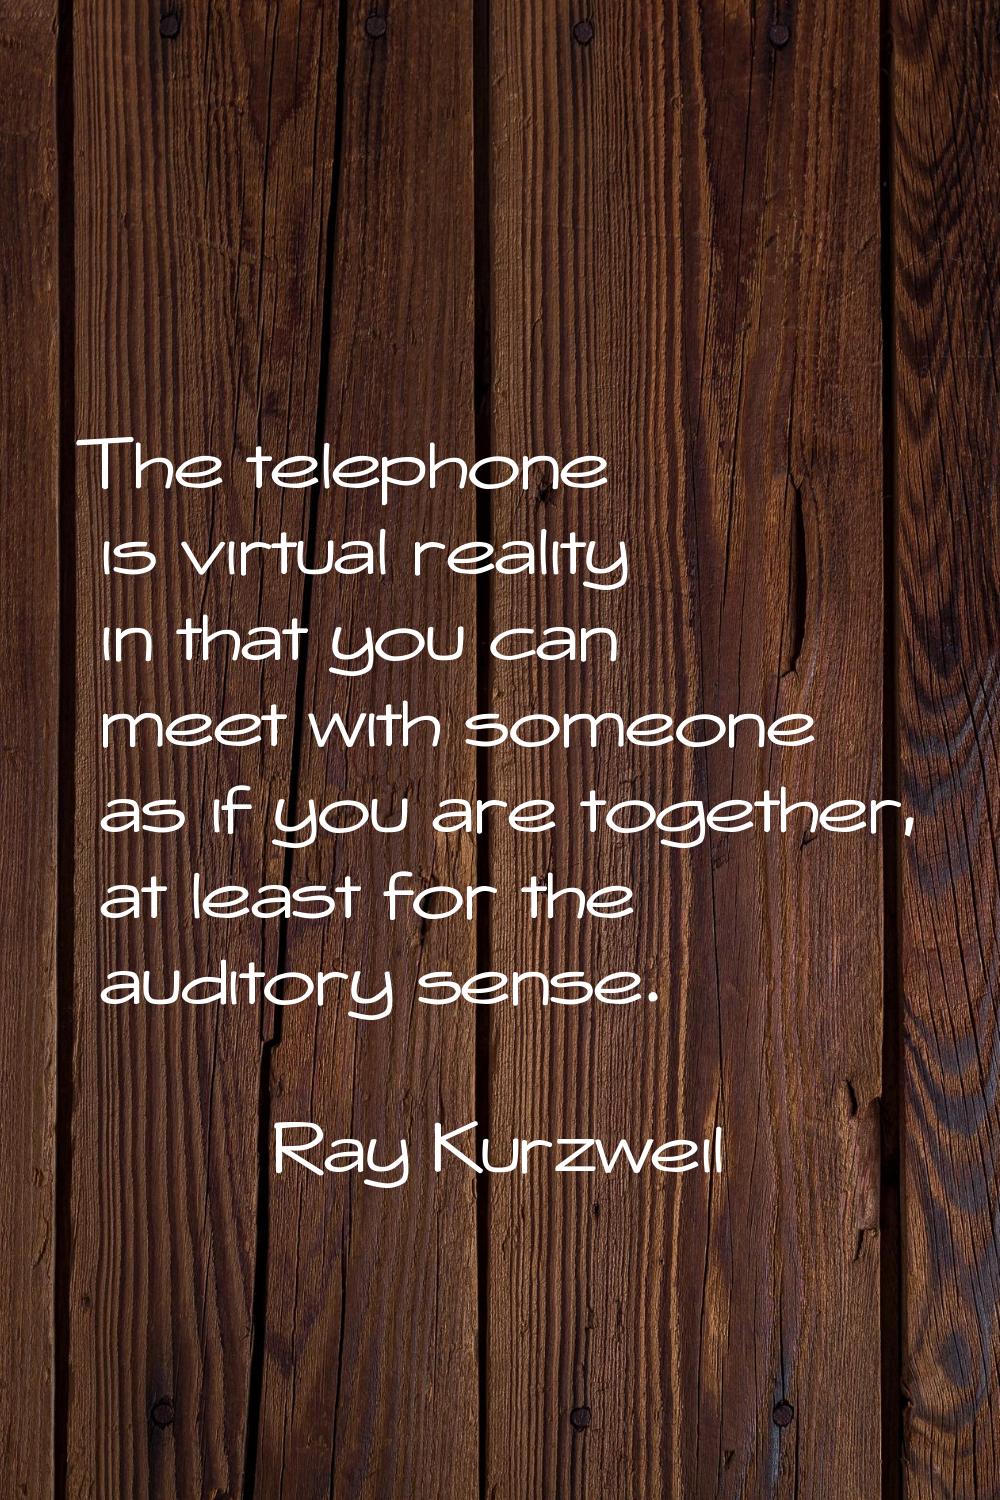 The telephone is virtual reality in that you can meet with someone as if you are together, at least